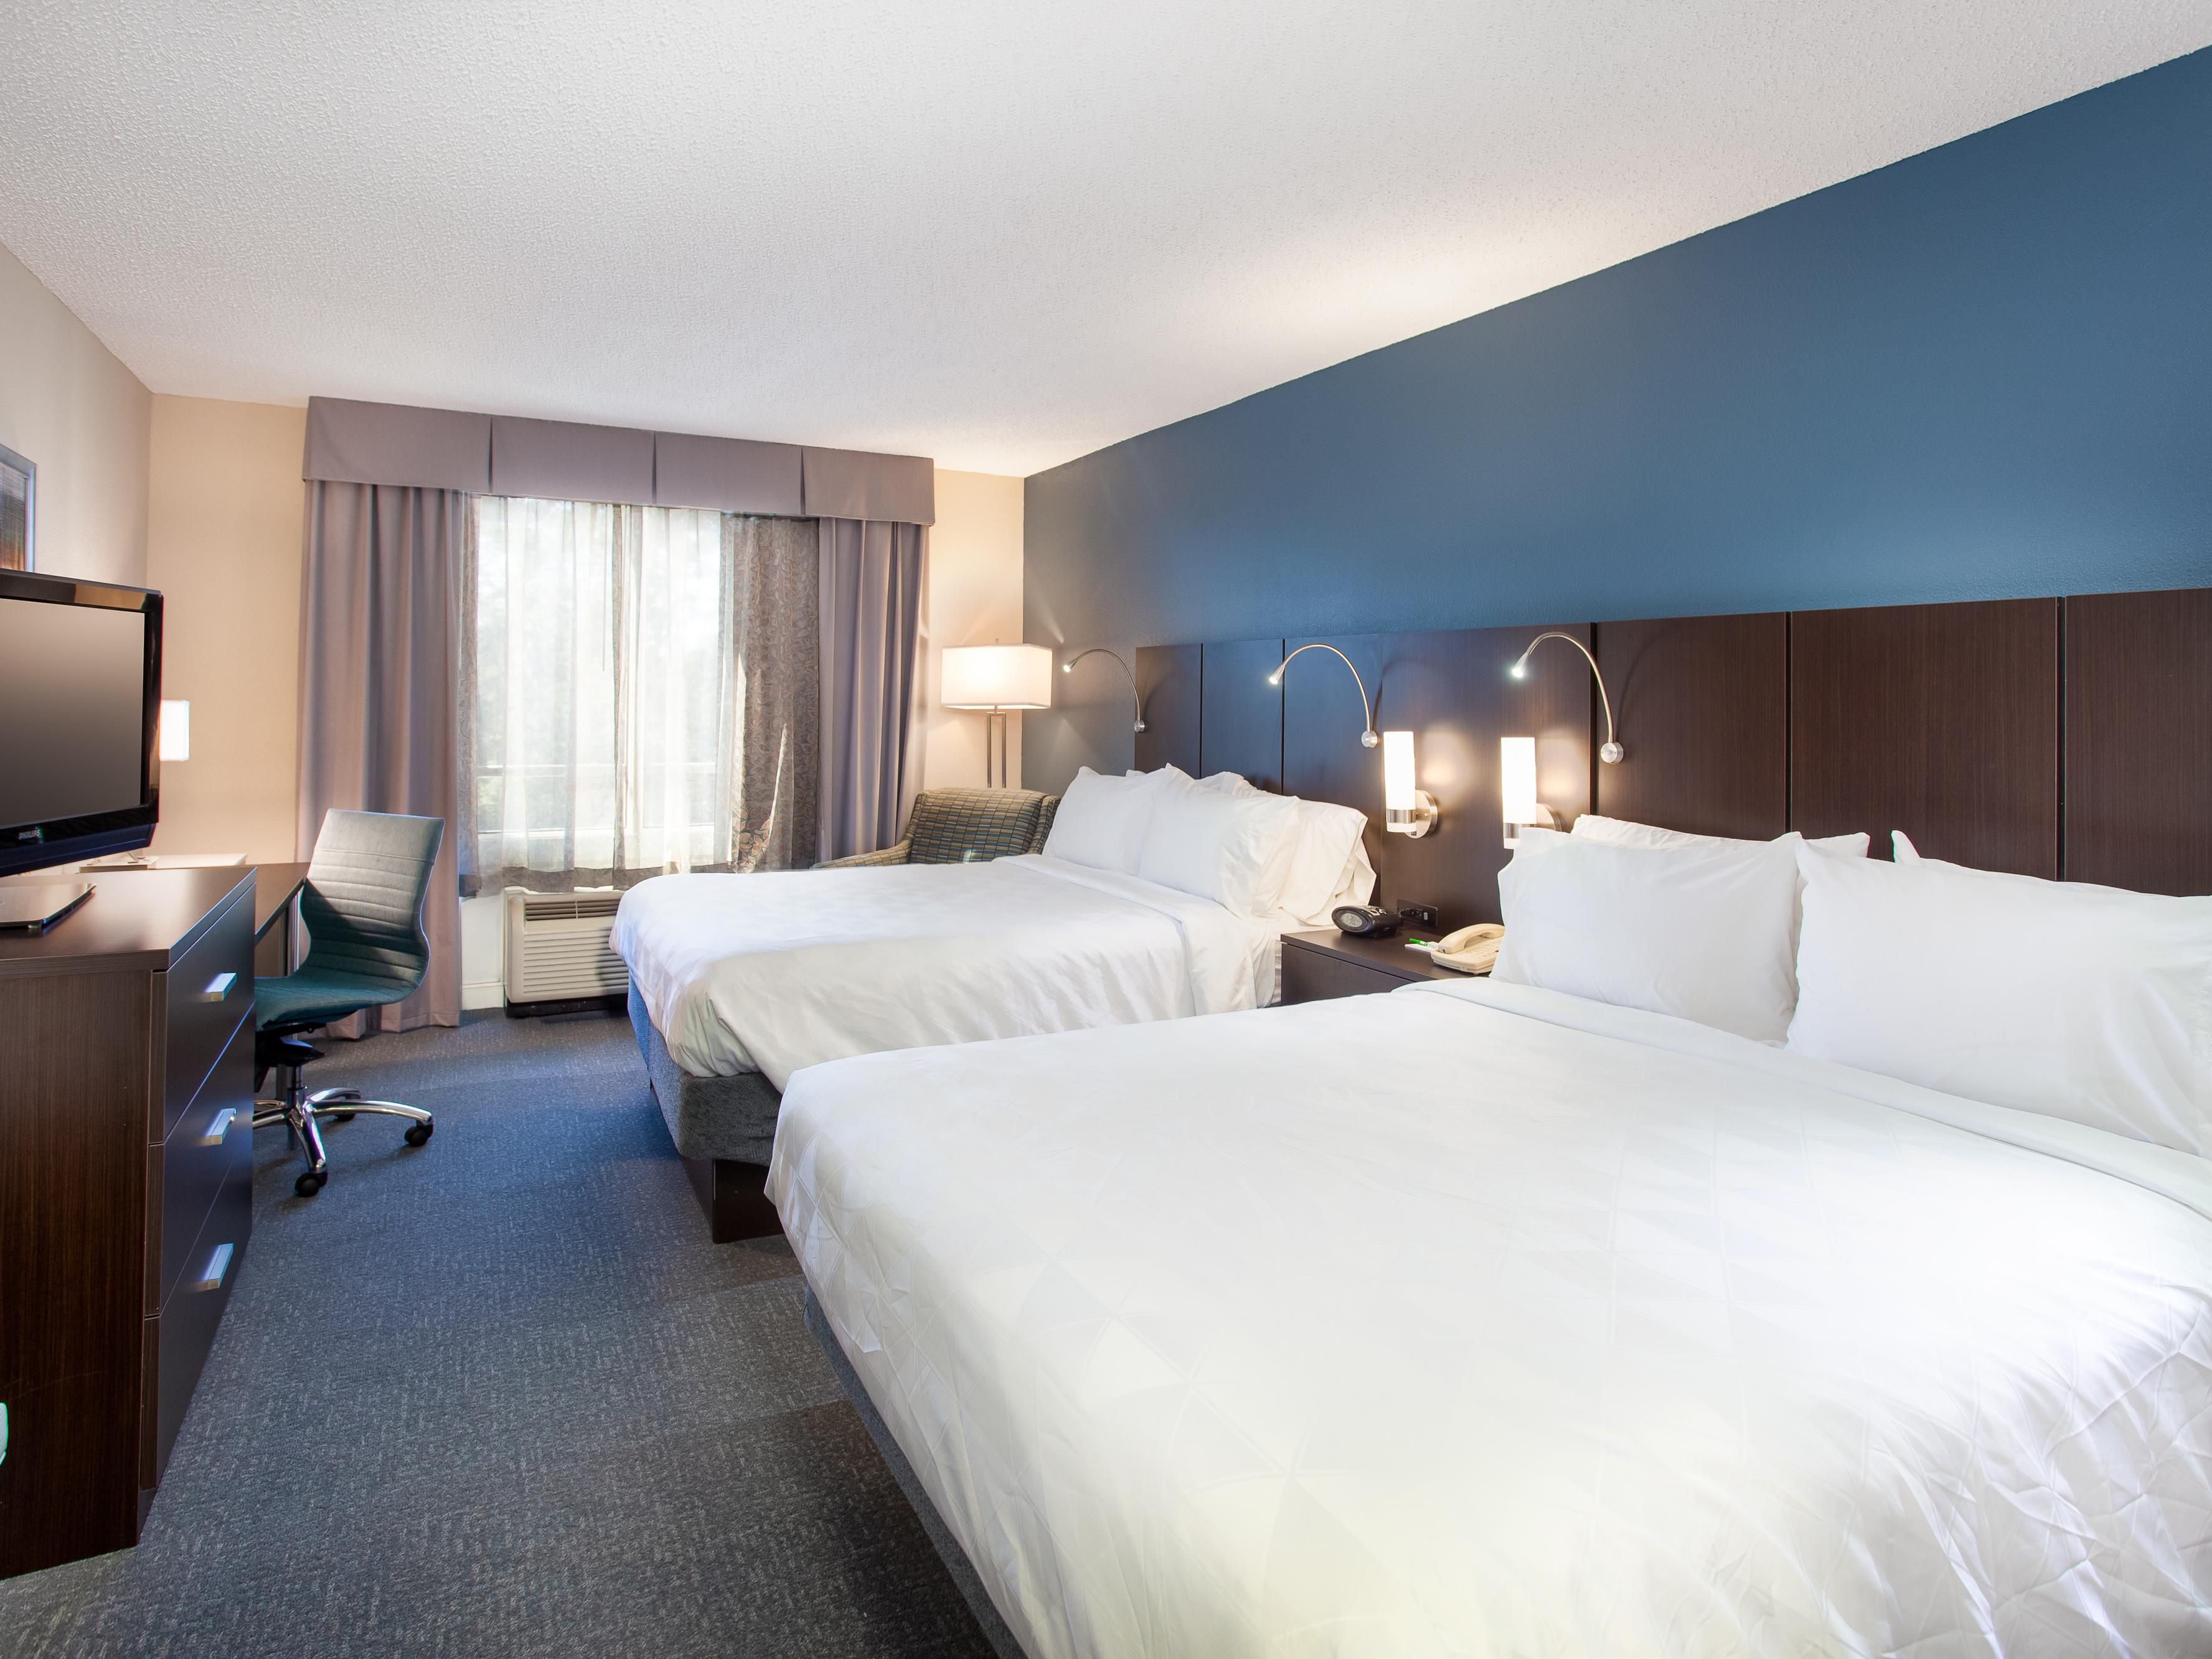 Holiday Inn Tallahassee is ready to host sports teams, coaches, and travelers! With plush double queen beds and on-site Bistro 27 restaurant, we're the perfect place to gear up for the big match or tournament!